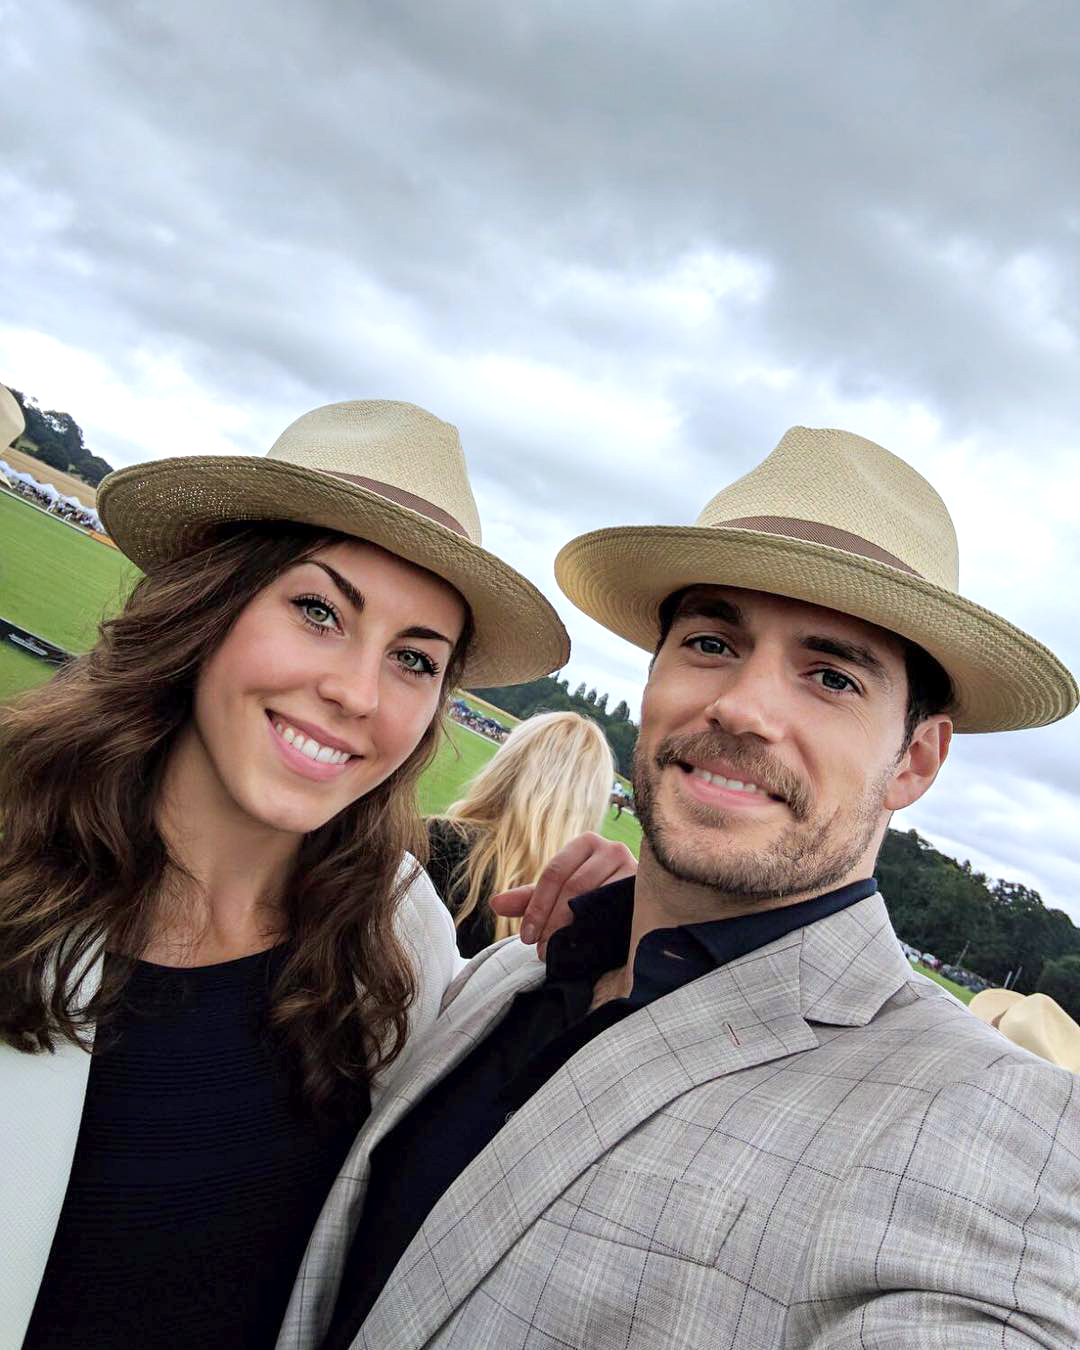 Henry Cavill makes red carpet debut with Hollywood executive girlfriend  Natalie Viscuso - OK! Magazine